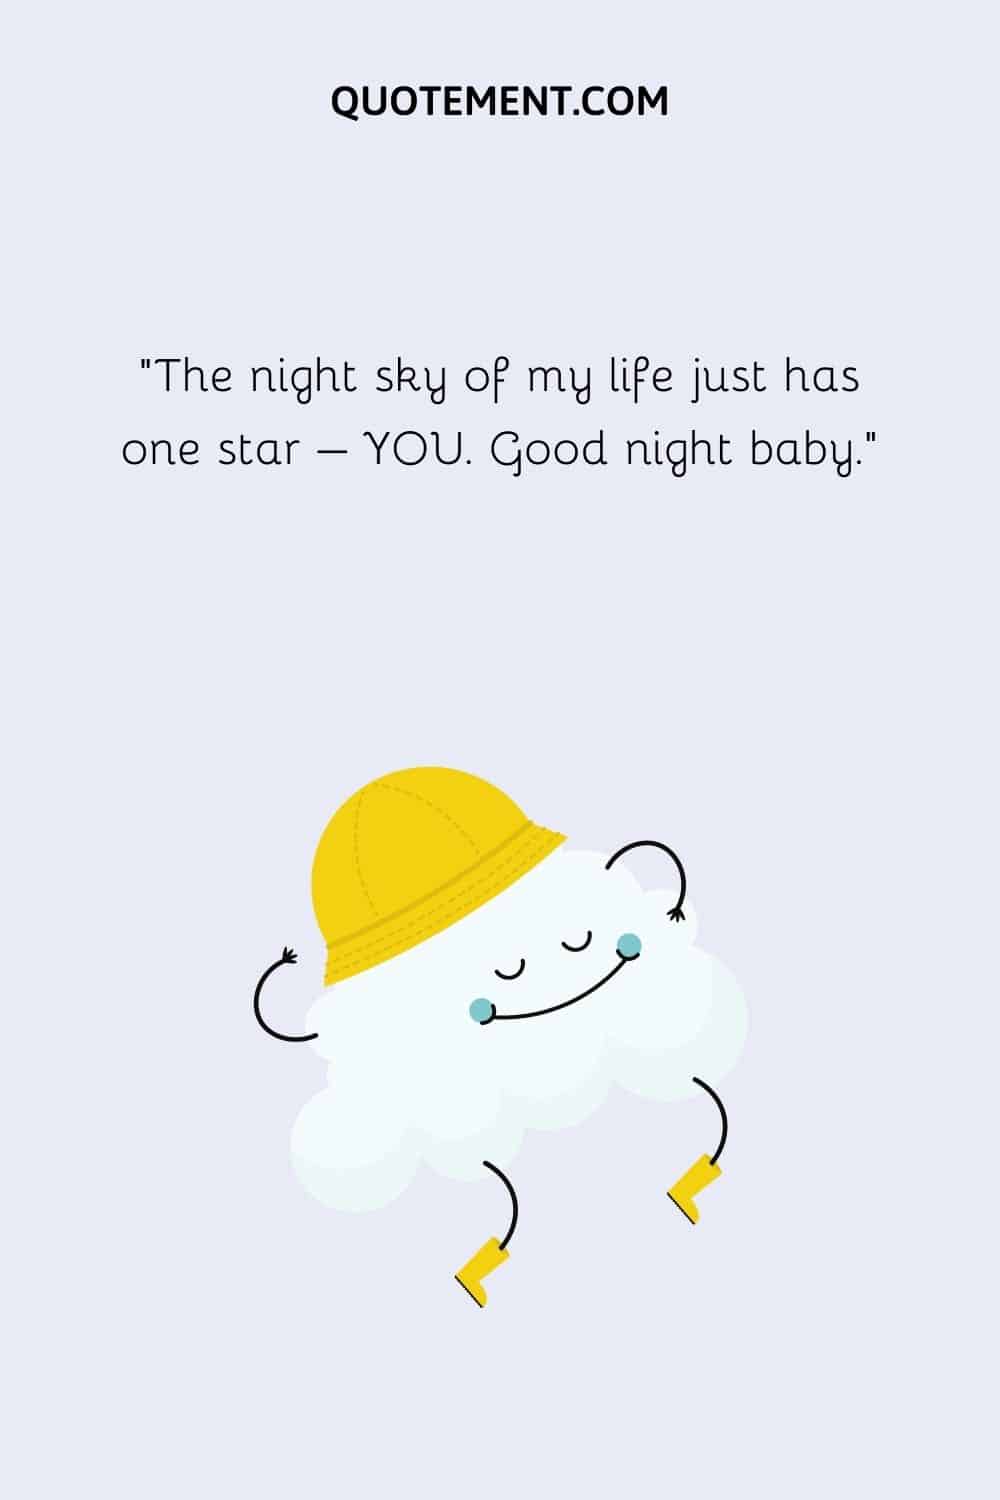 The night sky of my life just has one star